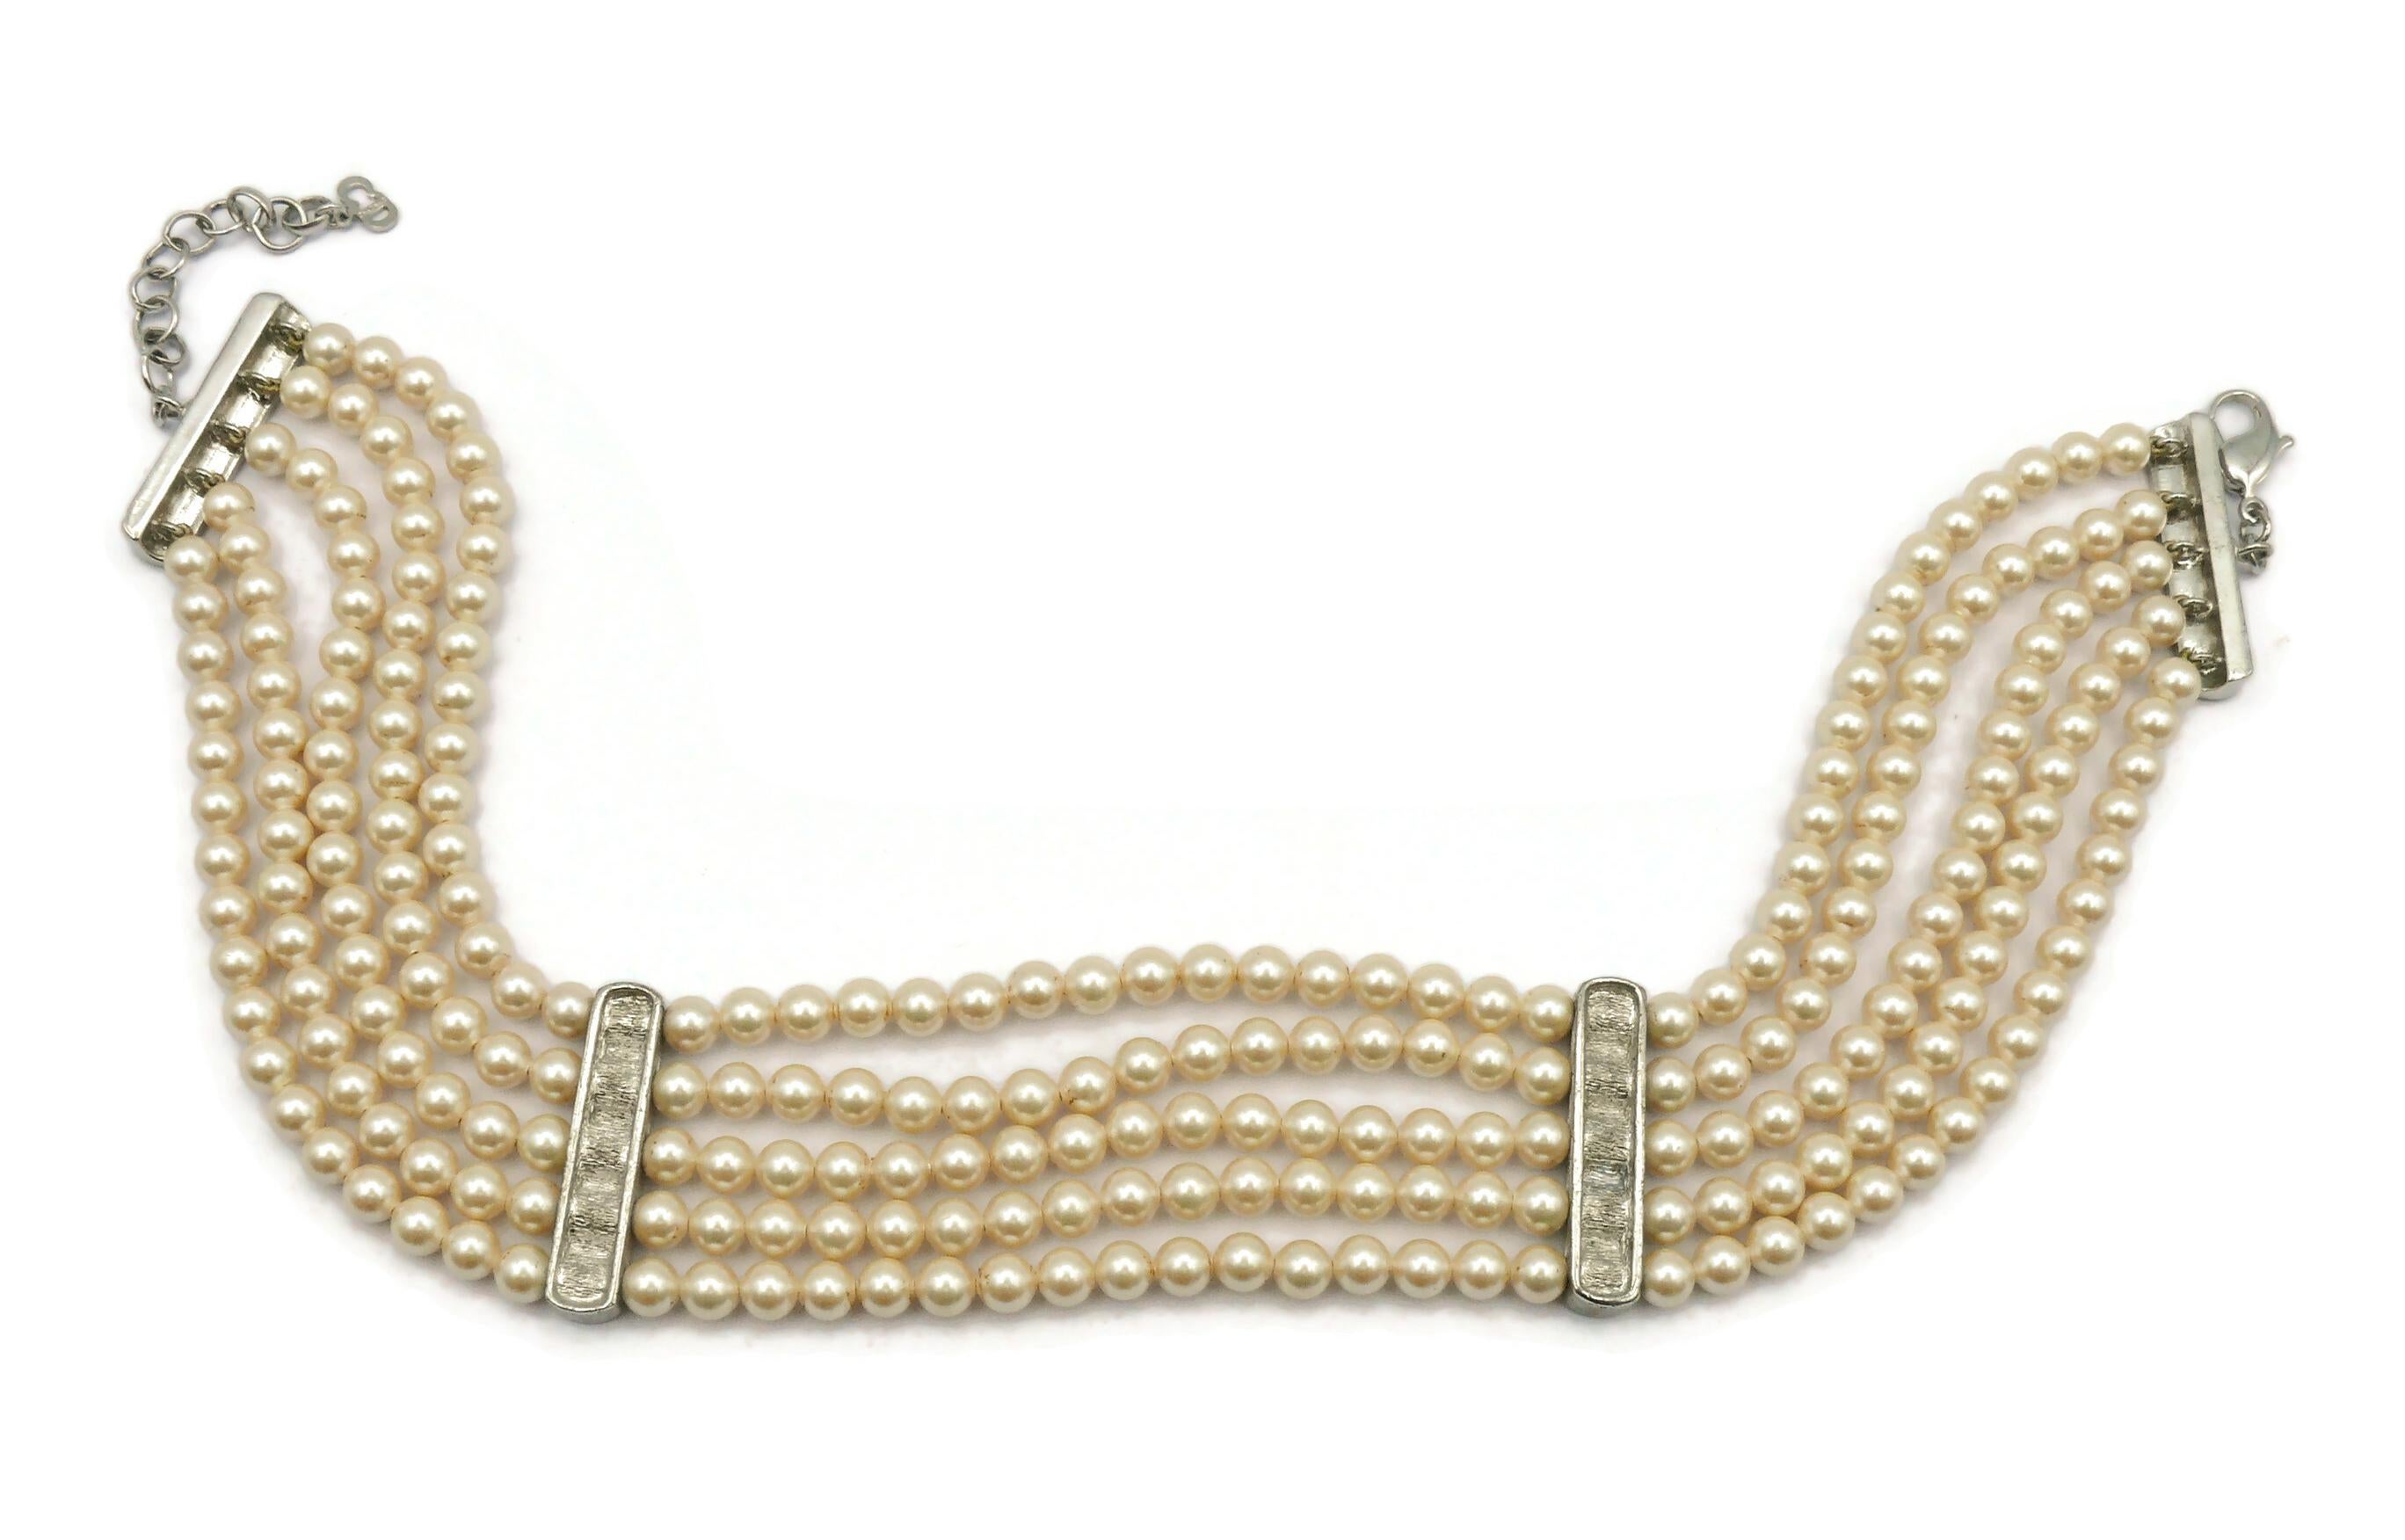 CHRISTIAN DIOR Vintage Multi-Strand Faux Pearl Necklace For Sale 5